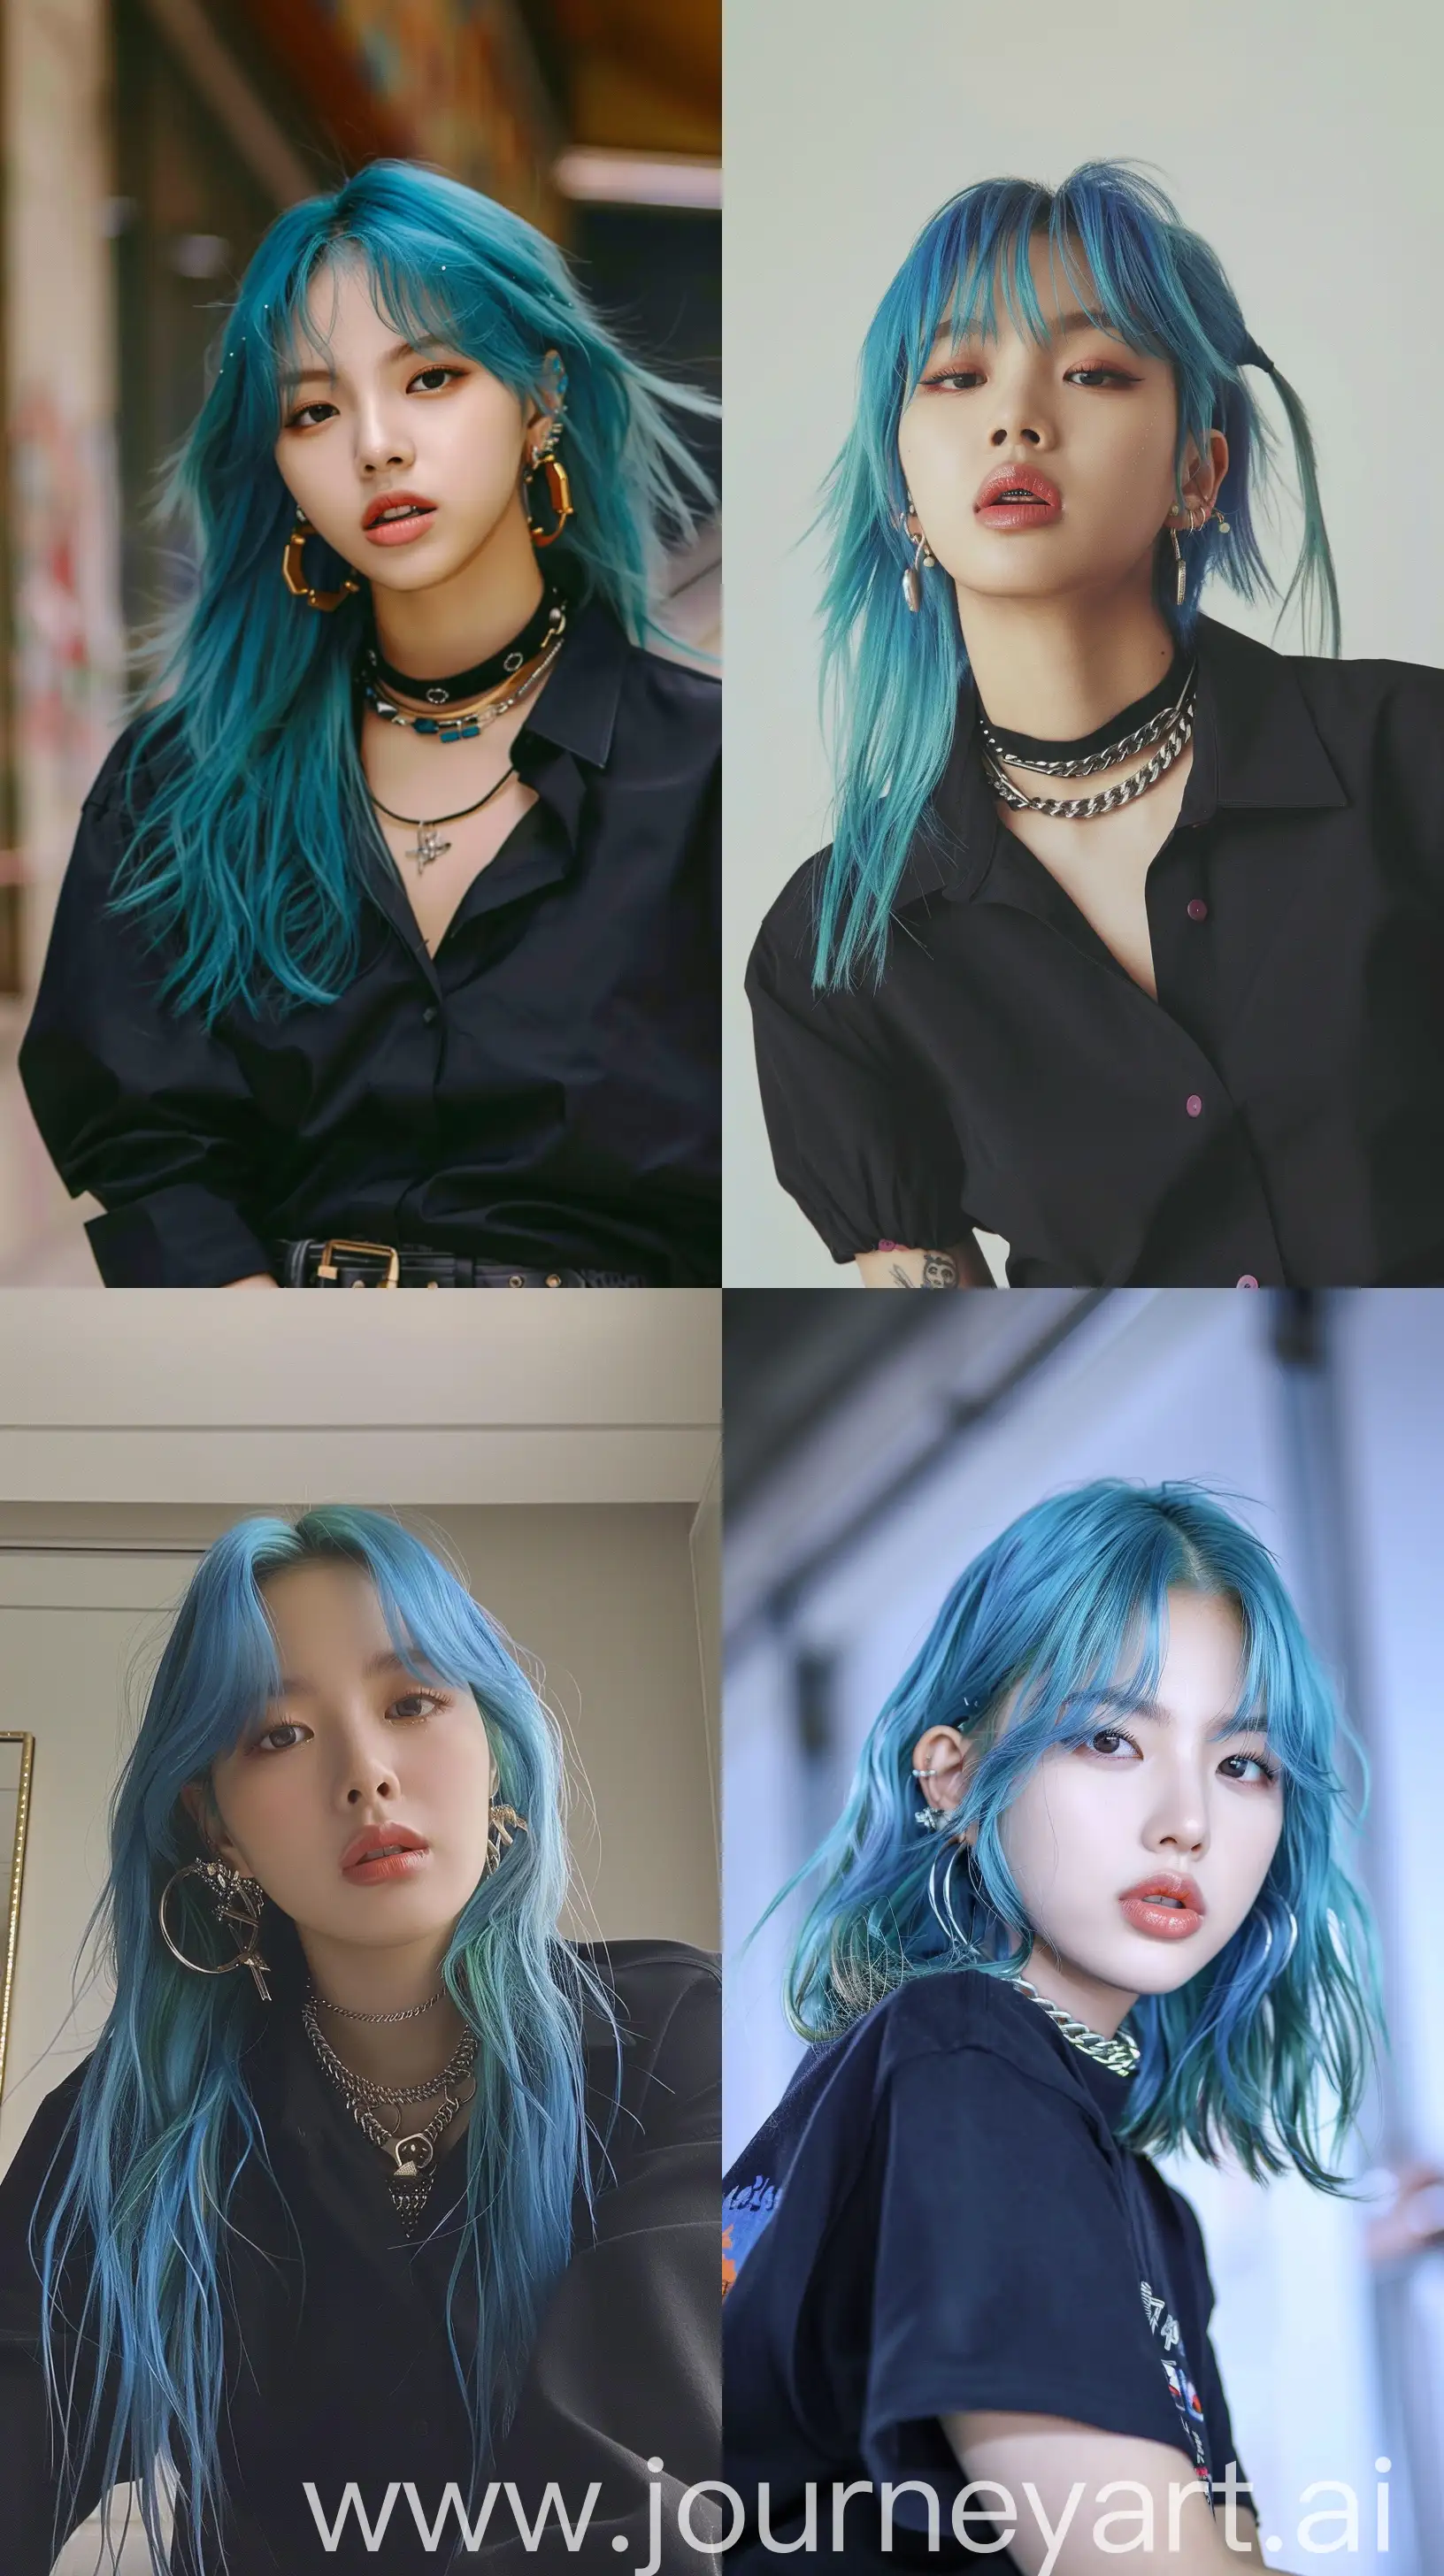 Jennie-from-BLACKPINK-with-Blue-Wolfcut-Hair-in-Stylish-Black-Shirt